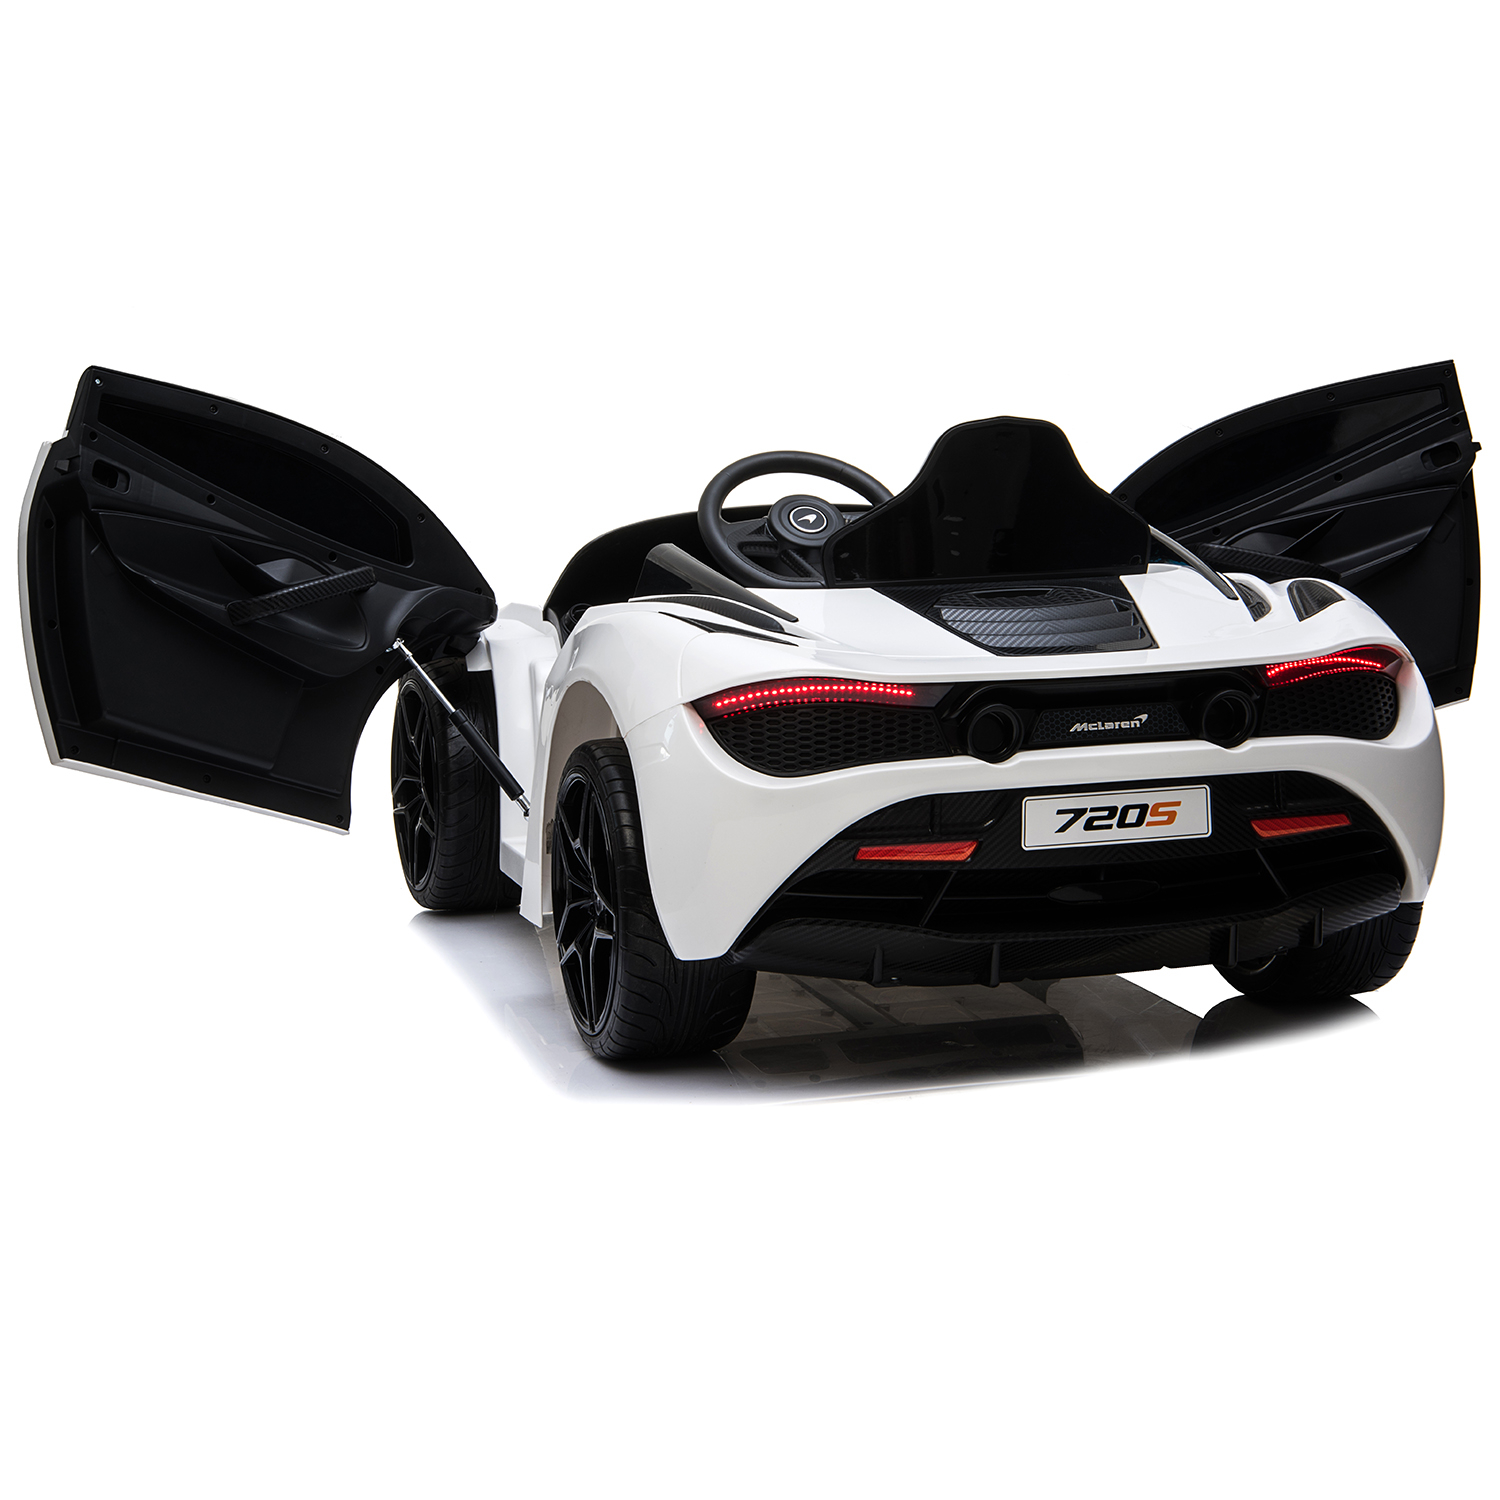 Licensed Mclaren 720s 12v Ride On Car W Remote Control For Kids Leather Seat Butterfly Doors Bluetooth Mp3 Usb Suspension And Led Lights White intended for sizing 1500 X 1500